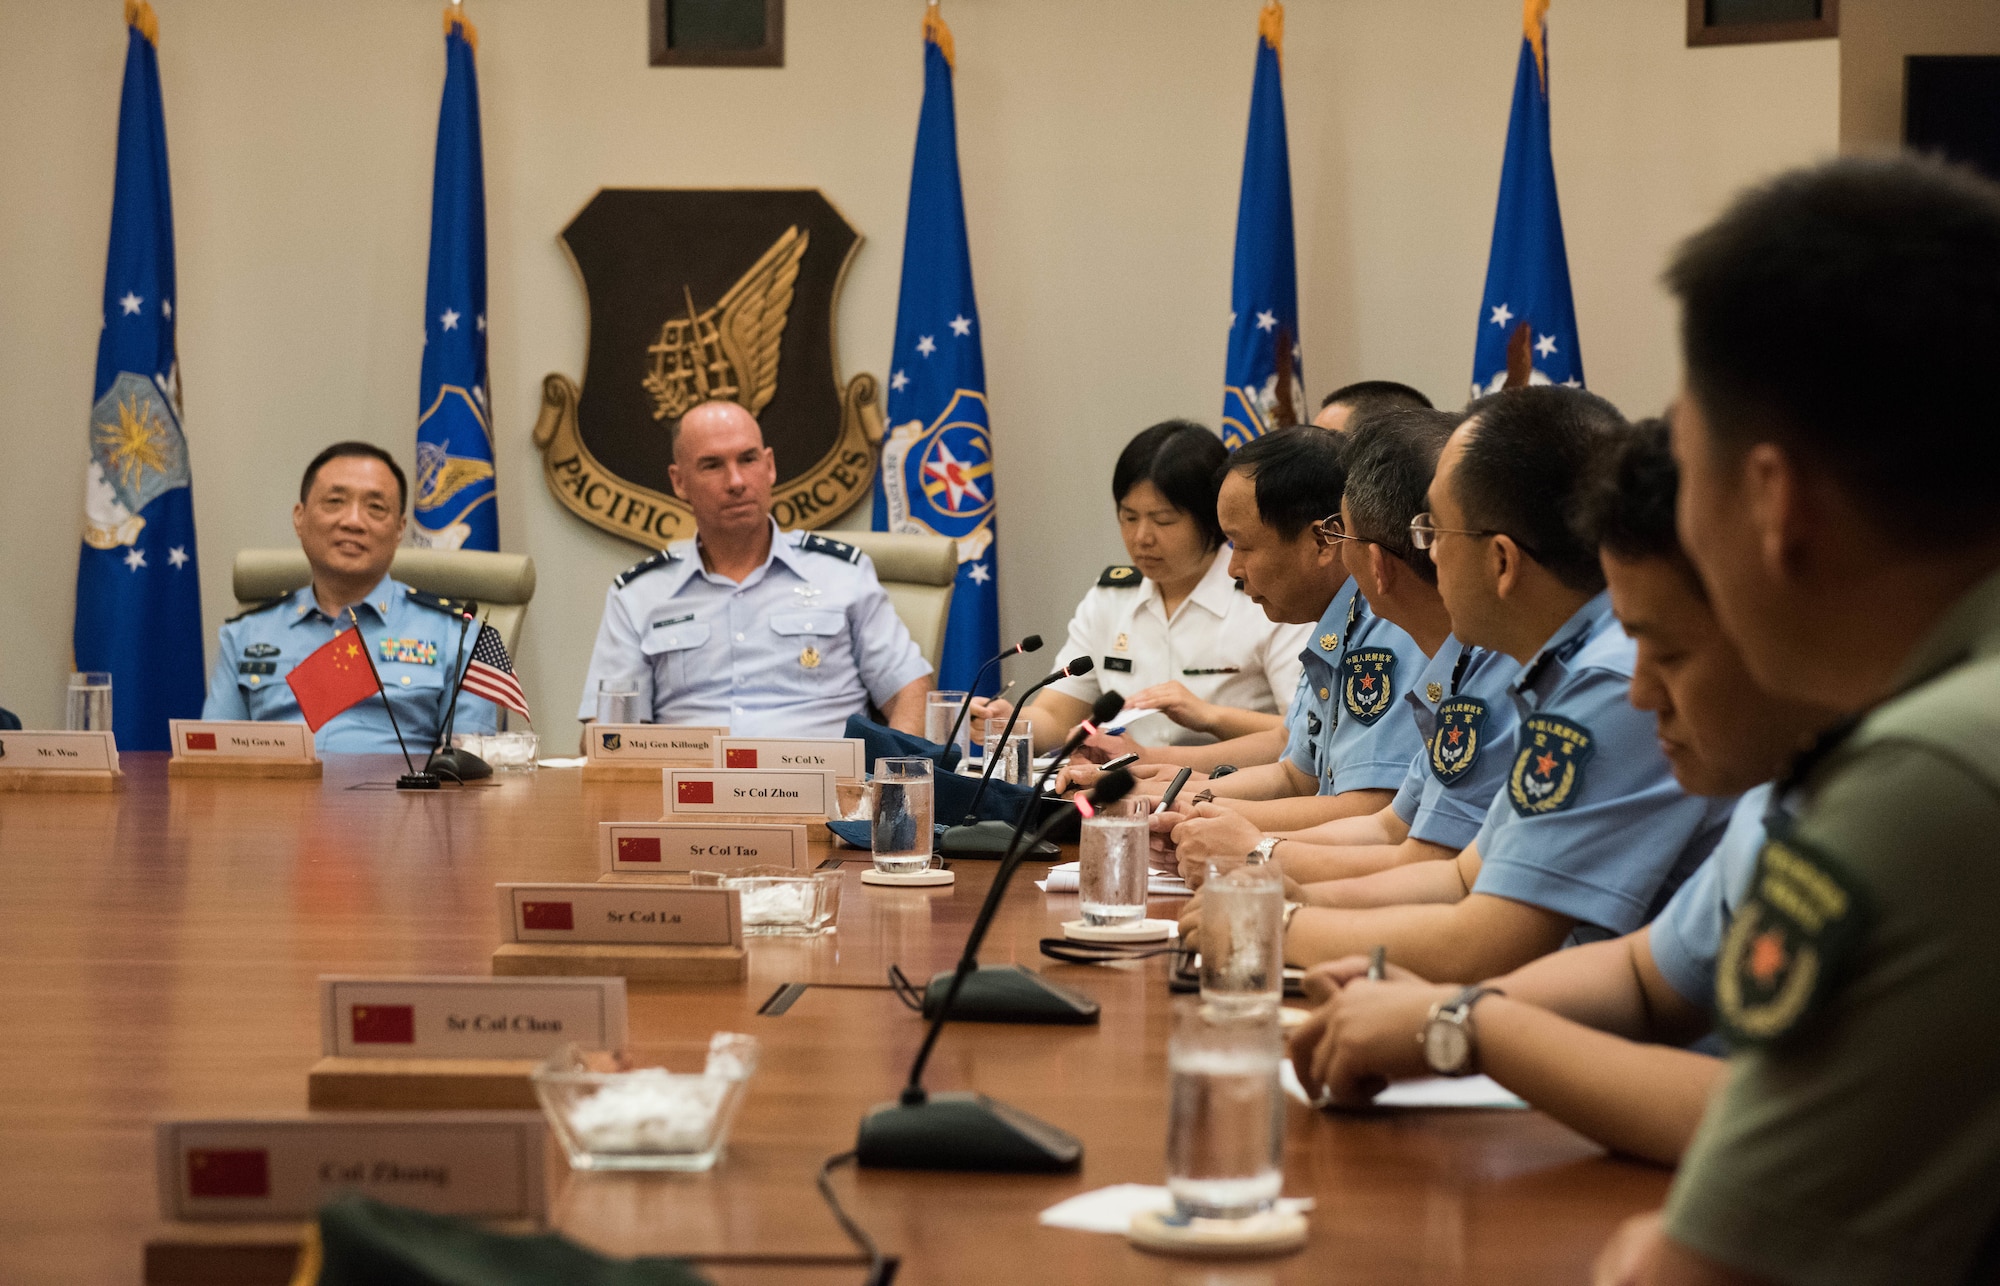 Members of the People’s Liberation Army Air Force Command College introduce themselves during a visit to Headquarters Pacific Air Forces at Joint Base Pearl Harbor-Hickam, Hawaii, May 28, 2019. This is a reciprocal visit, following on the visit that members of the U.S. Air War College took to China in March 2019.